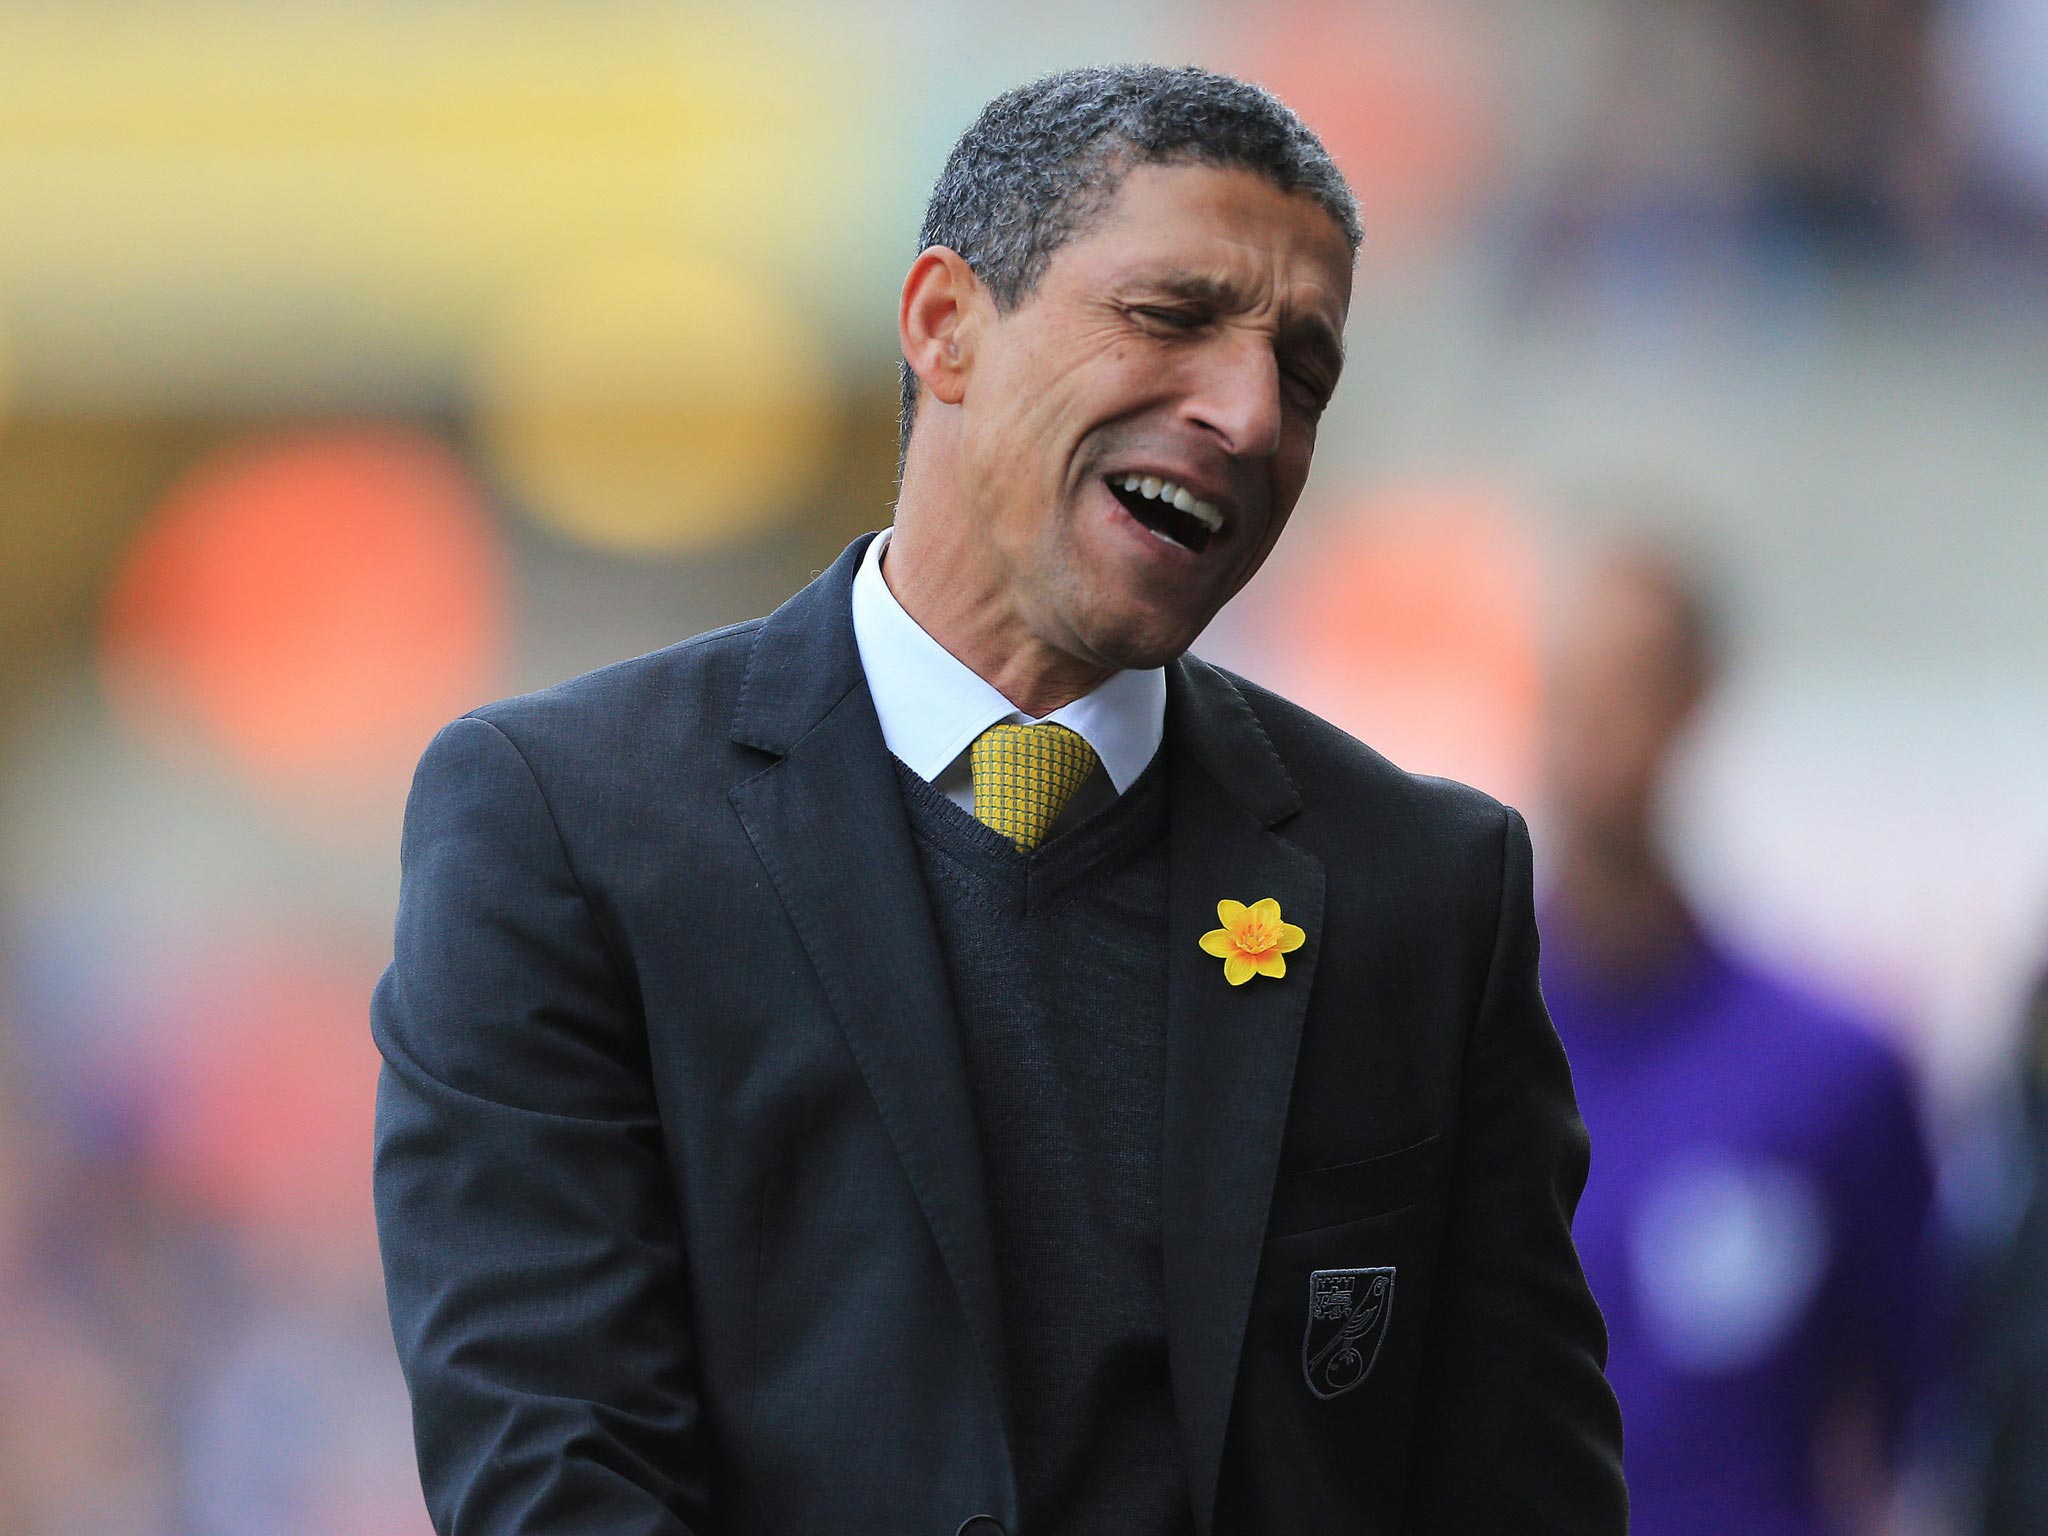 Some Norwich City fans believe that the dismissal of Chris Hughton was a necessary act to give the club a chance of avoiding relegation